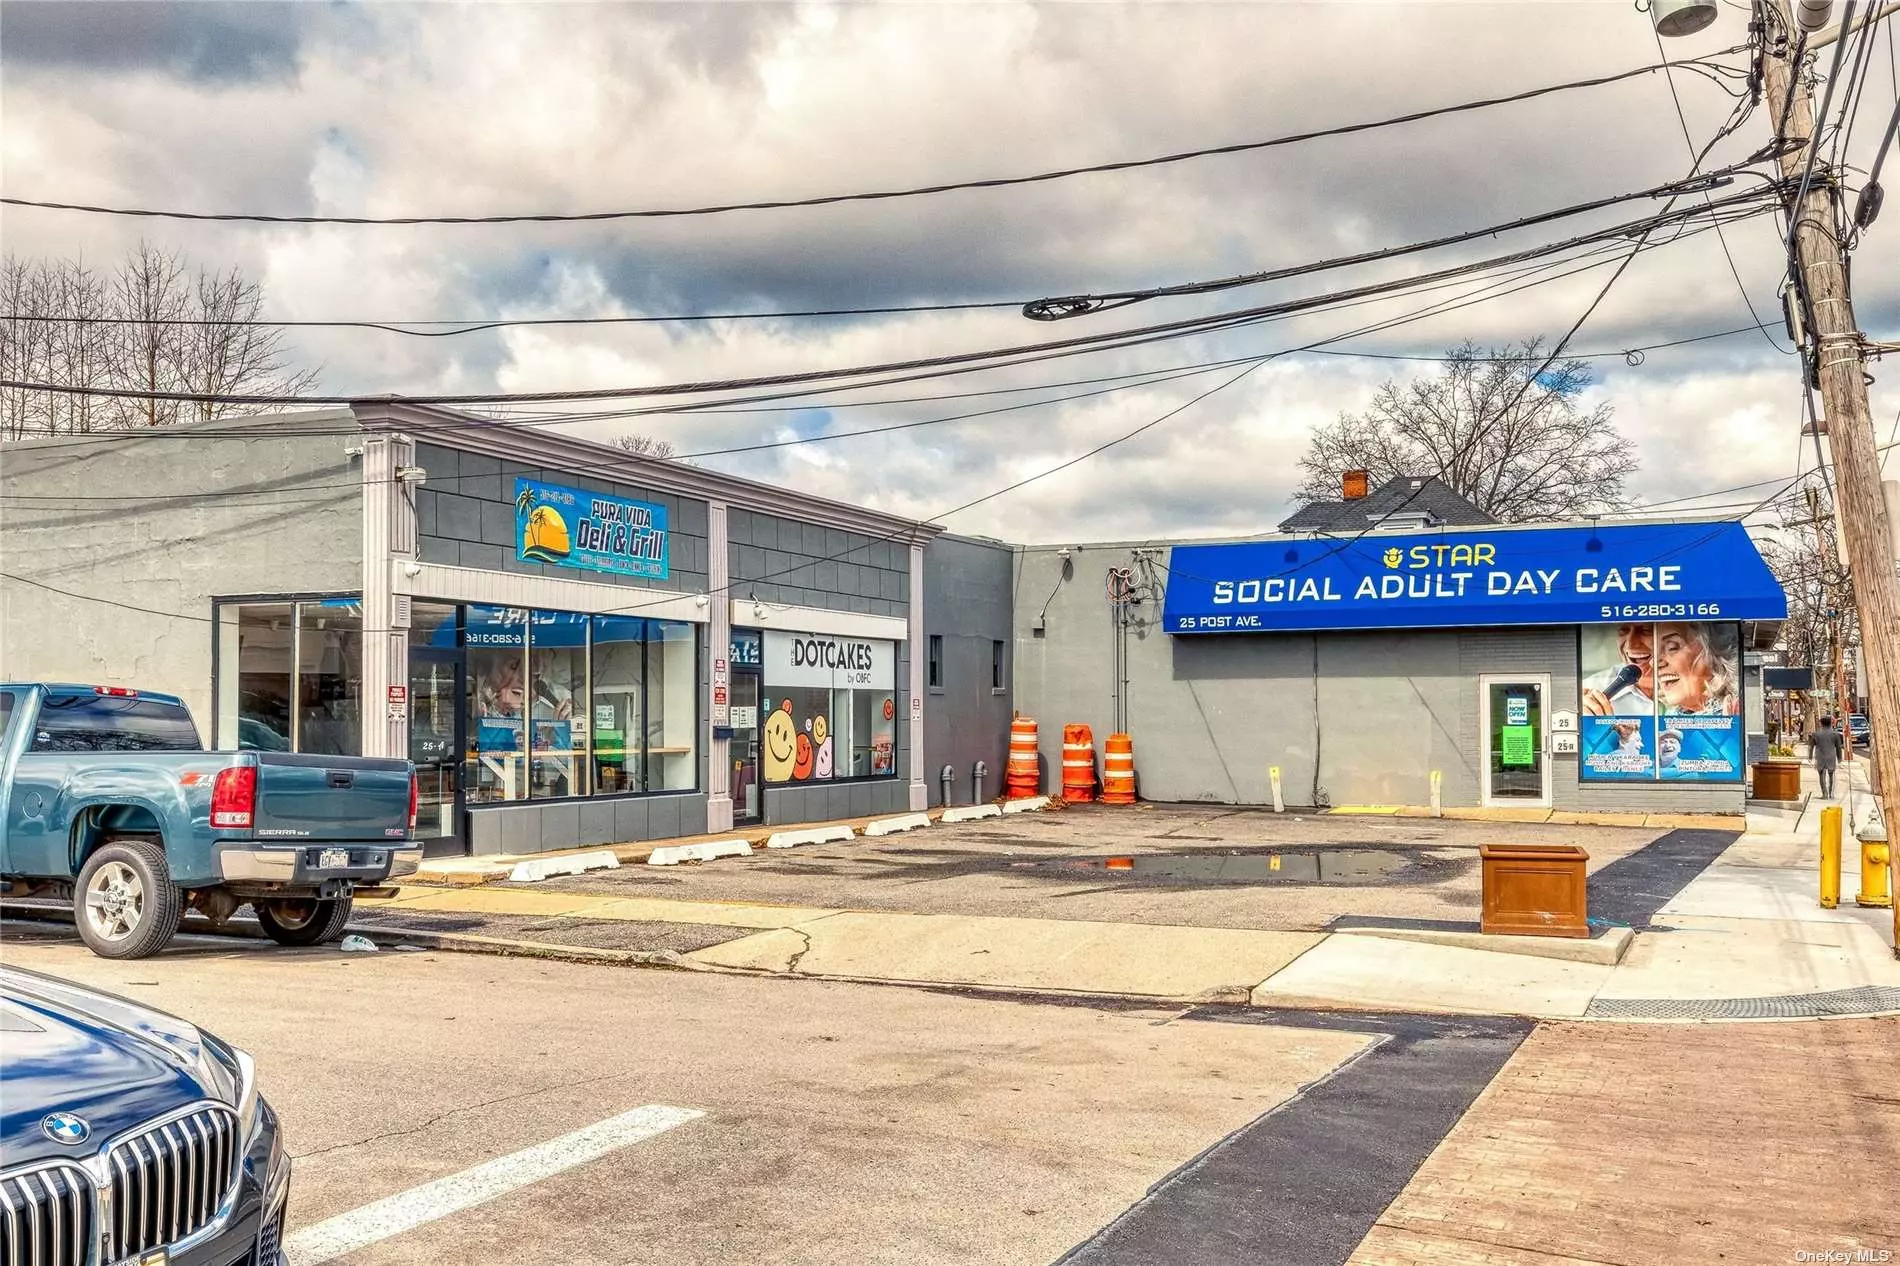 Great Commercial Property in the heart of post Ave . Great income producer or in use , Mostly redone New Roof 2024, and close to major highways and the LIRR, 3 Units Commercial Property main is 4, 500 SQF, Deli 1, 000 SQF, Dot Cake 1, 000 SQF, Adult Day For Sale for 150k and Deli 150k .